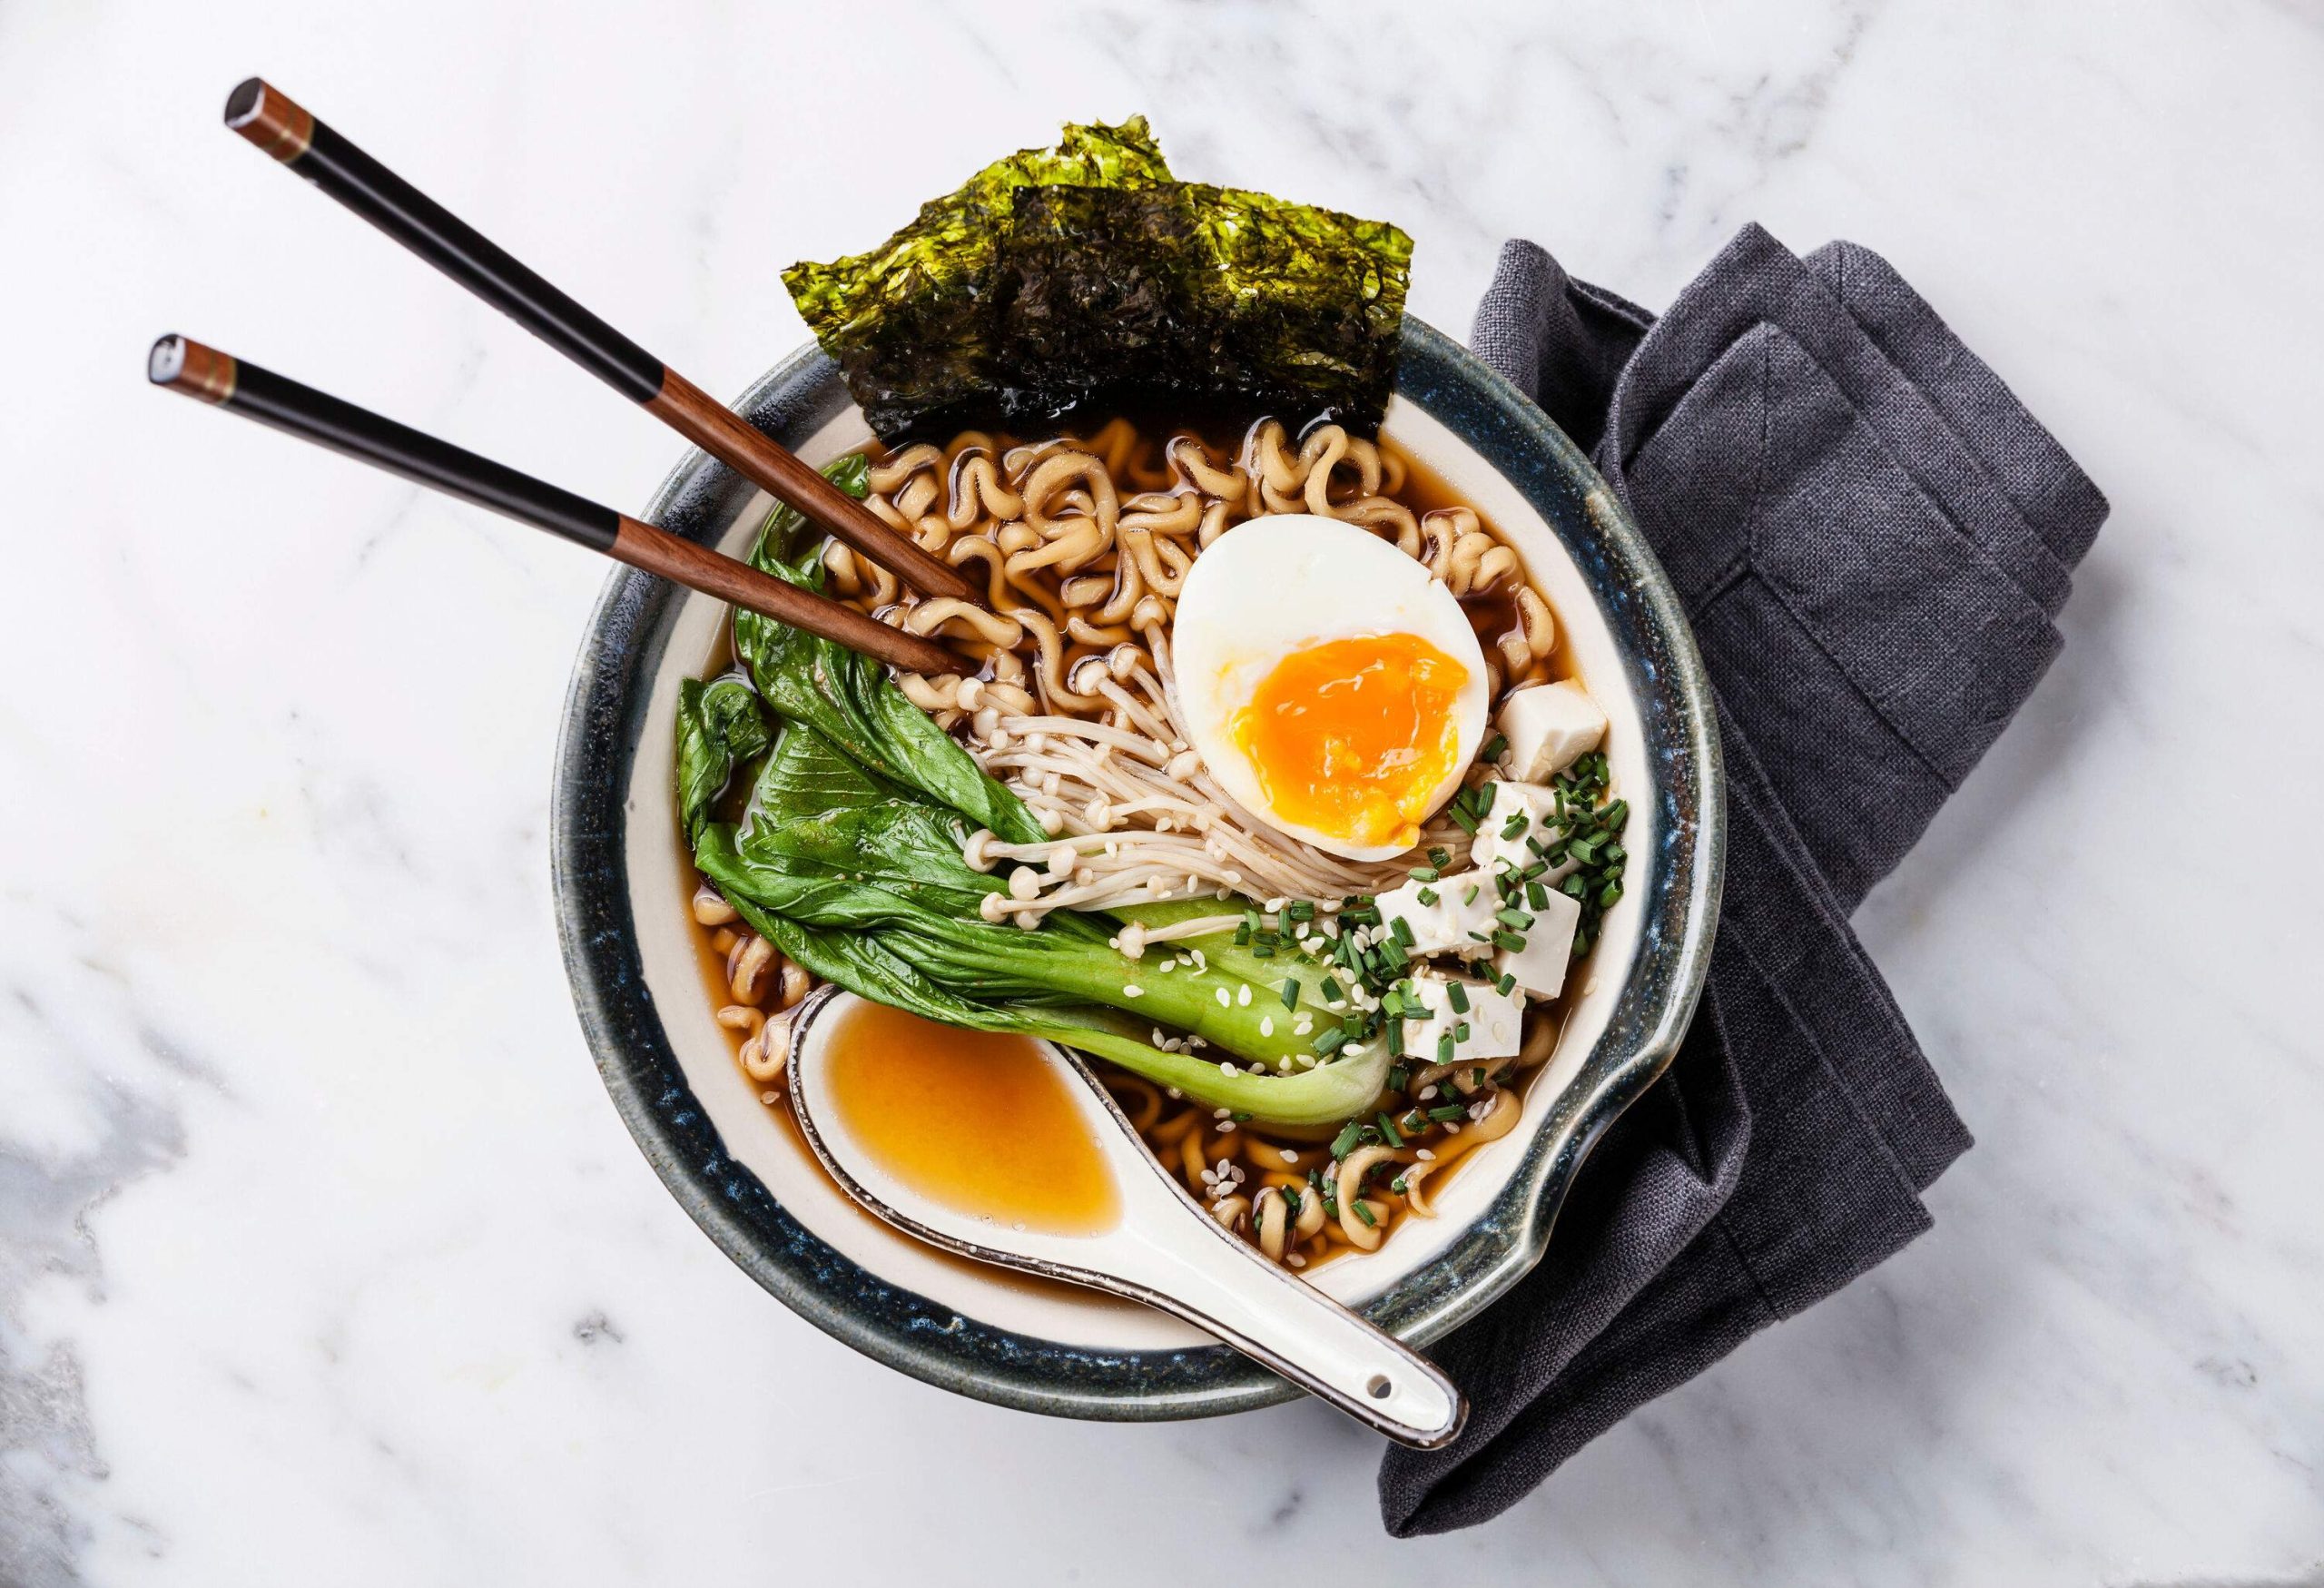 A bowl of ramen with seaweed sheets, soft-boiled egg, enoki mushroom, and bok choy on top of thick noodles.